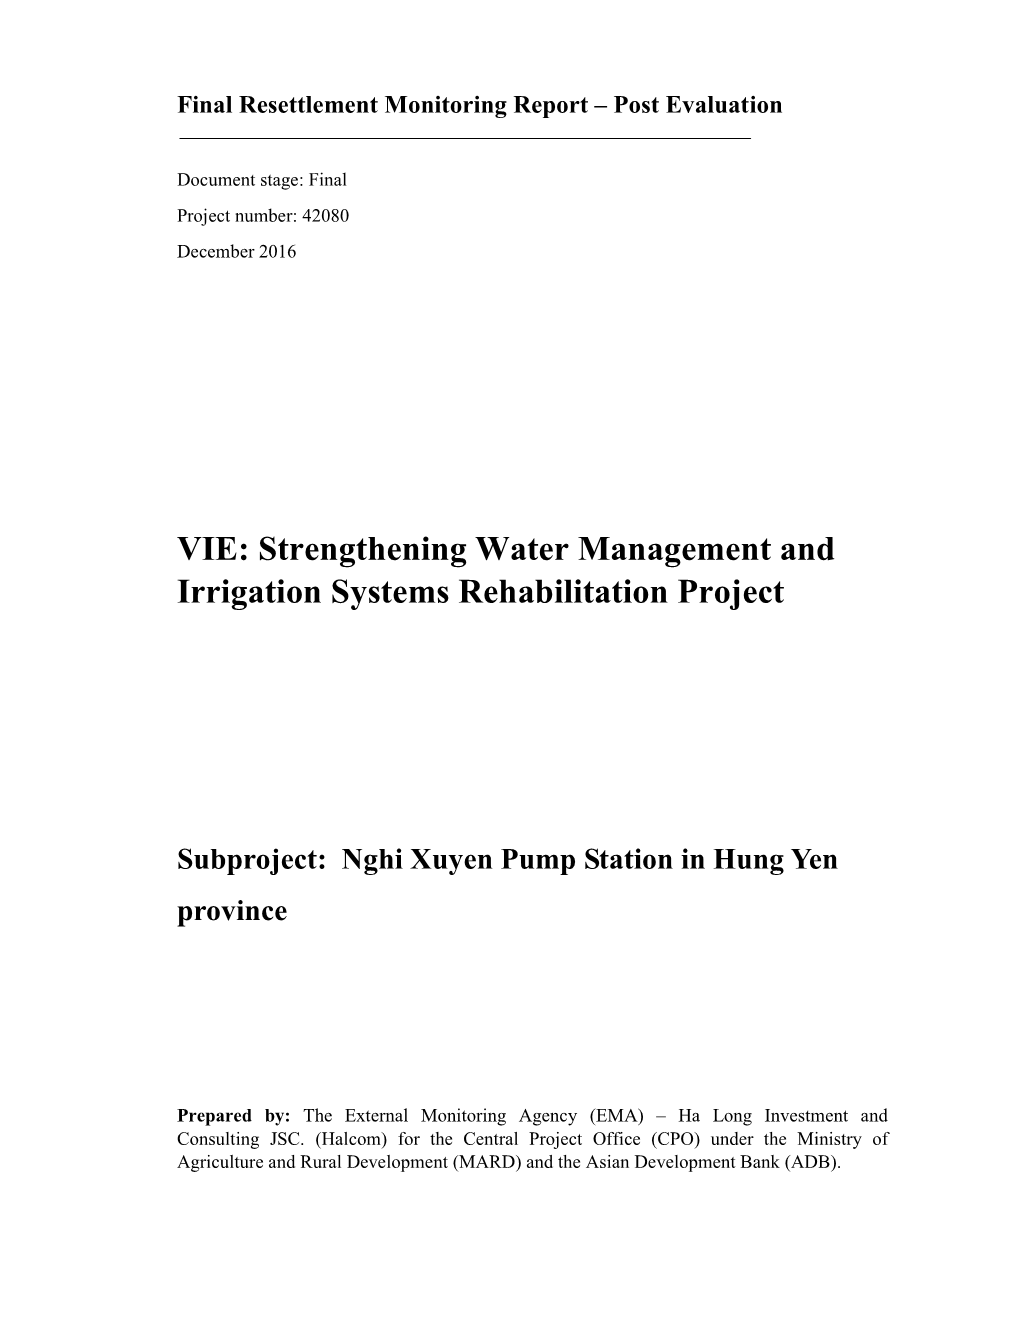 VIE: Strengthening Water Management and Irrigation Systems Rehabilitation Project